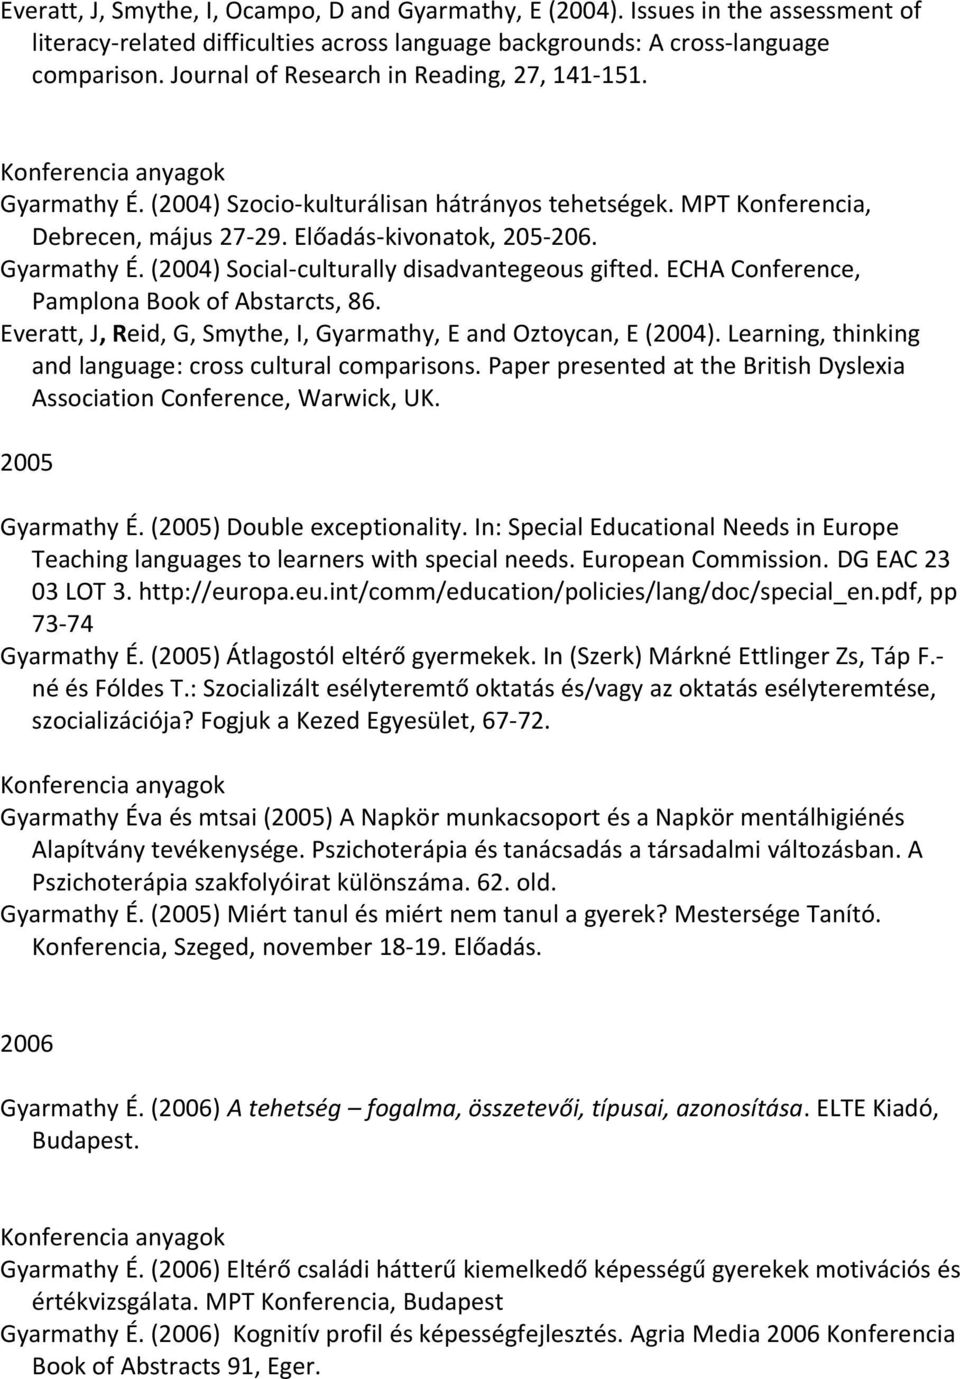 ECHA Conference, Pamplona Book of Abstarcts, 86. Everatt, J, Reid, G, Smythe, I, Gyarmathy, E and Oztoycan, E (2004). Learning, thinking and language: cross cultural comparisons.